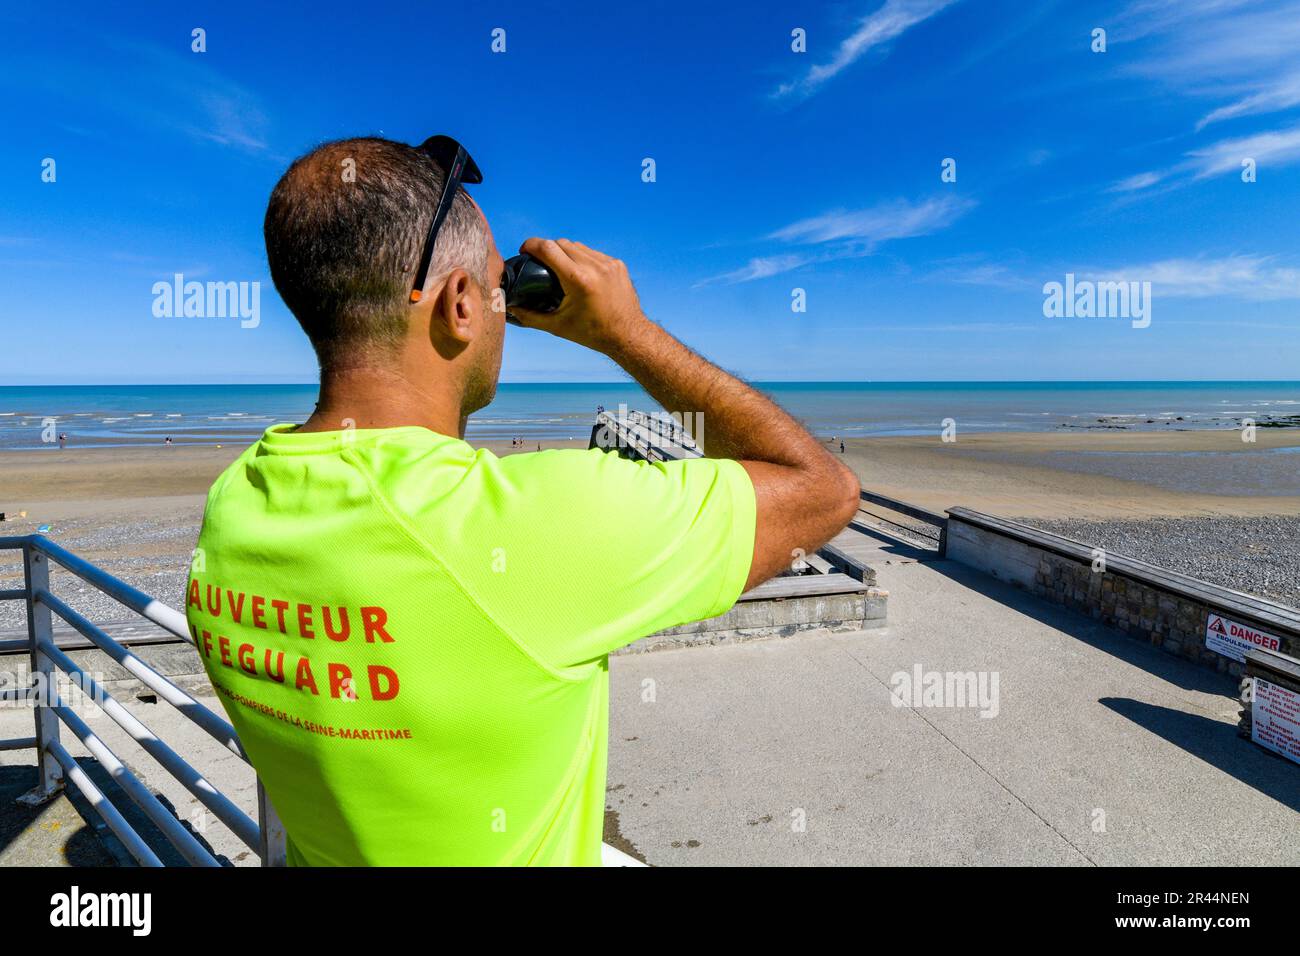 Lifeguard-fireman on the beach of Veules-les-Roses (Normandy, northern France) Stock Photo